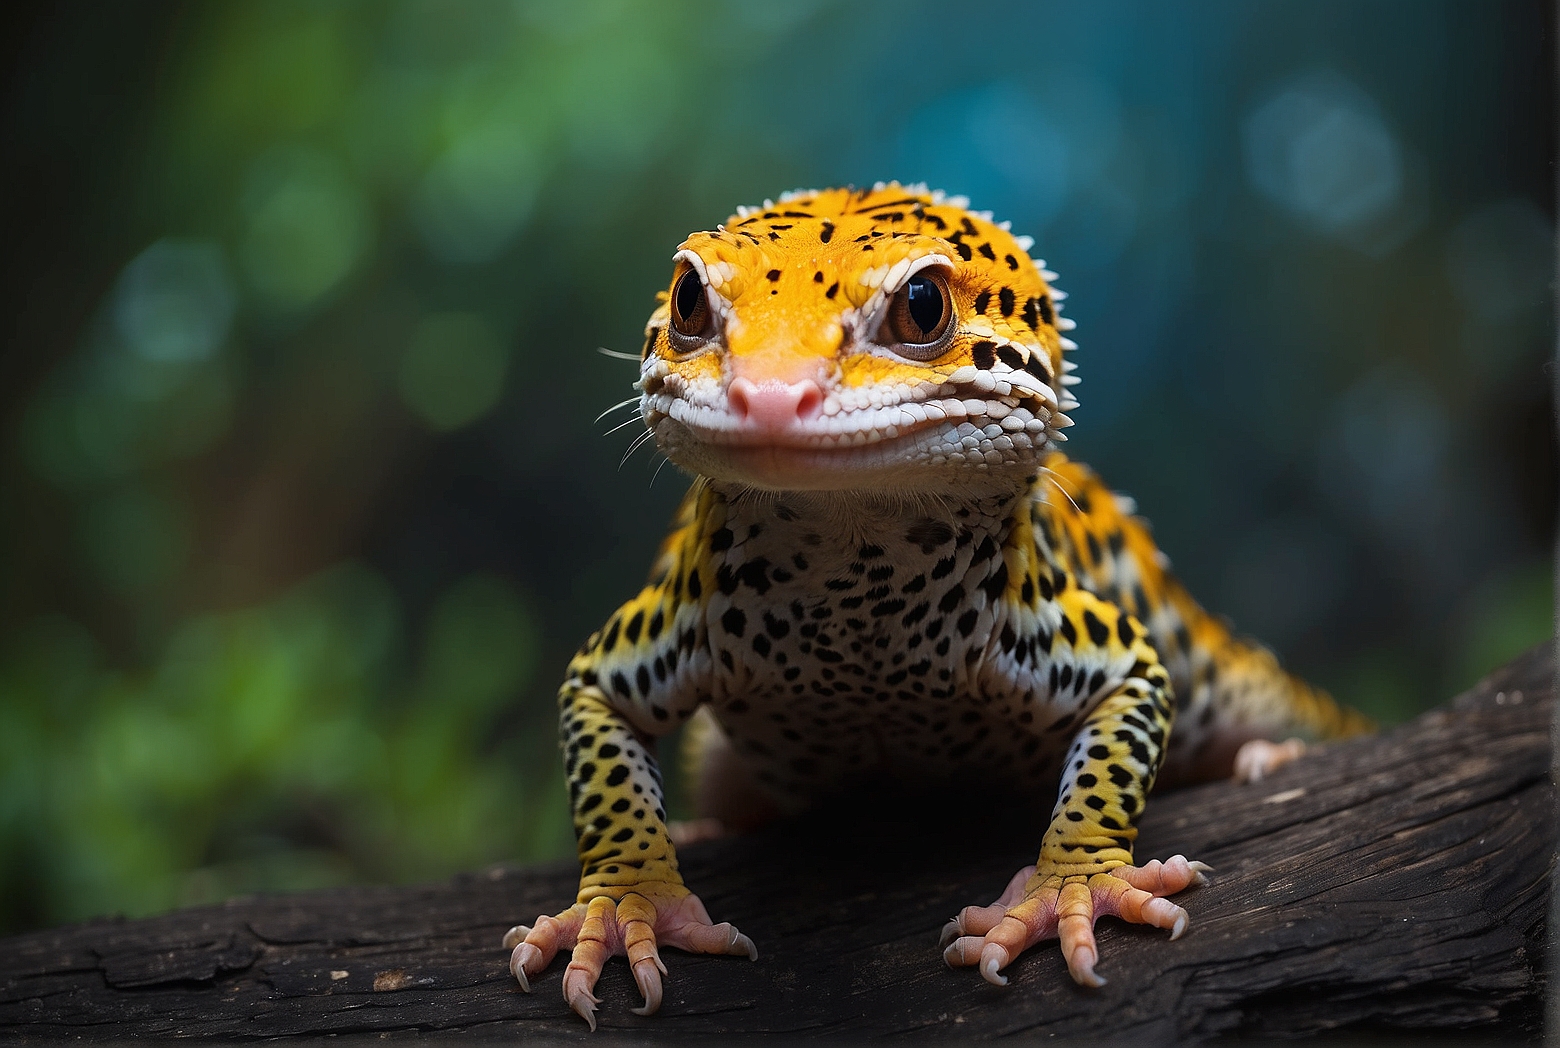 What Is The Maximum Age Of A Leopard Gecko?